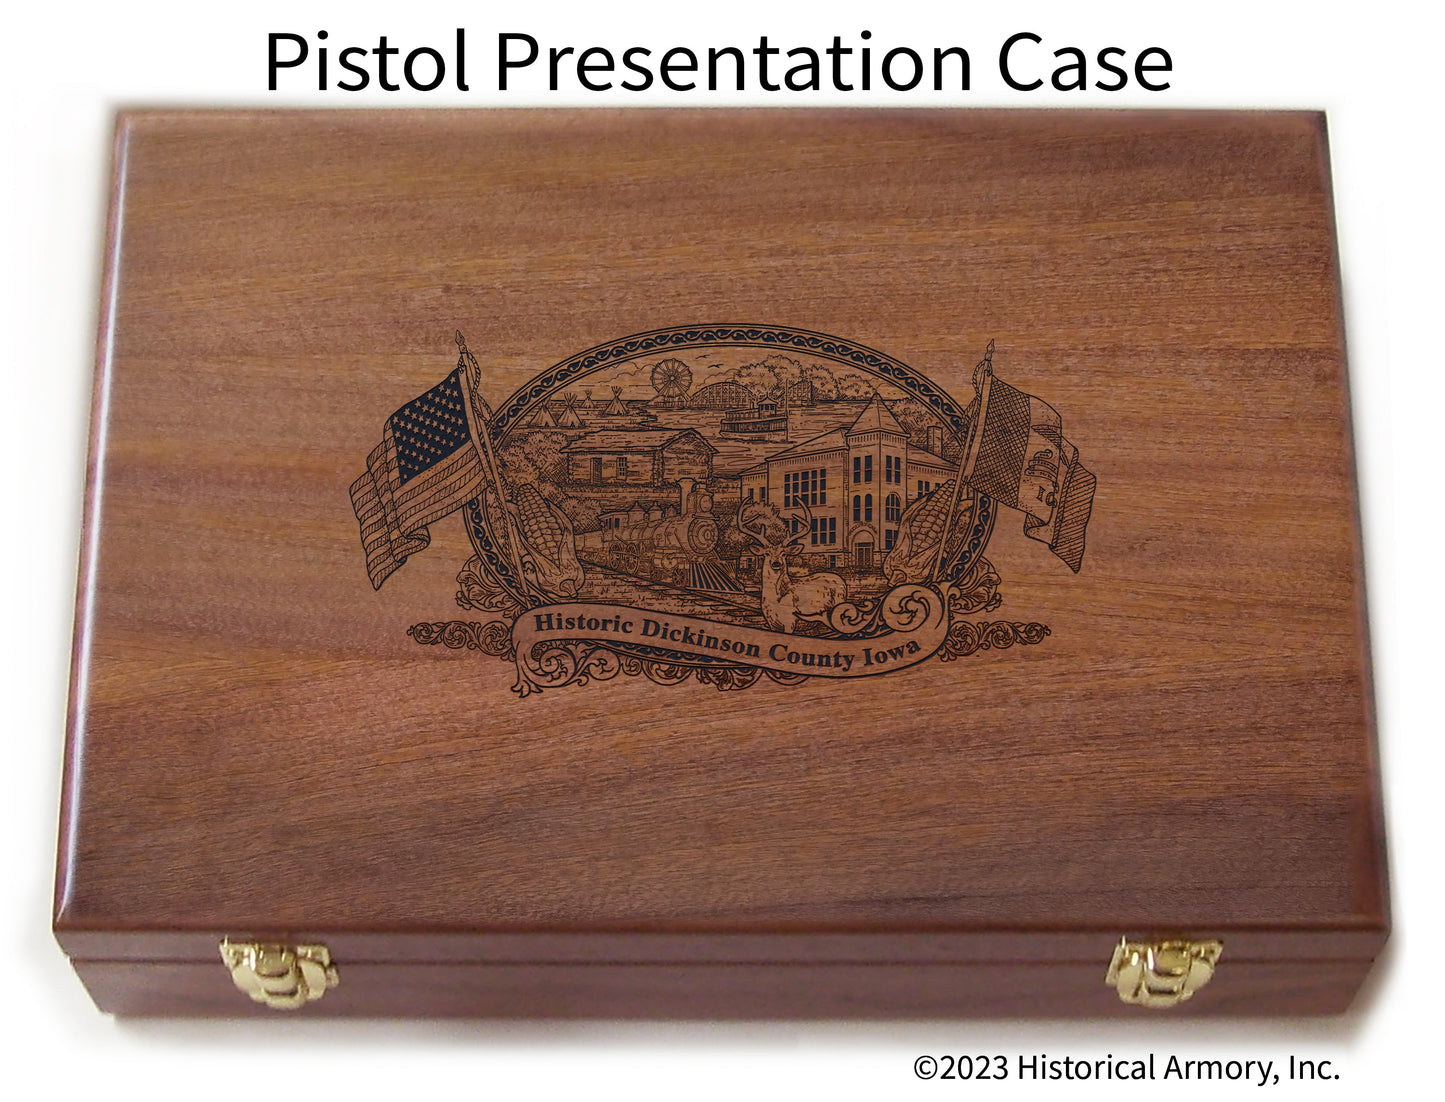 Dickinson County Iowa Engraved .45 Auto Ruger 1911 Presentation Case